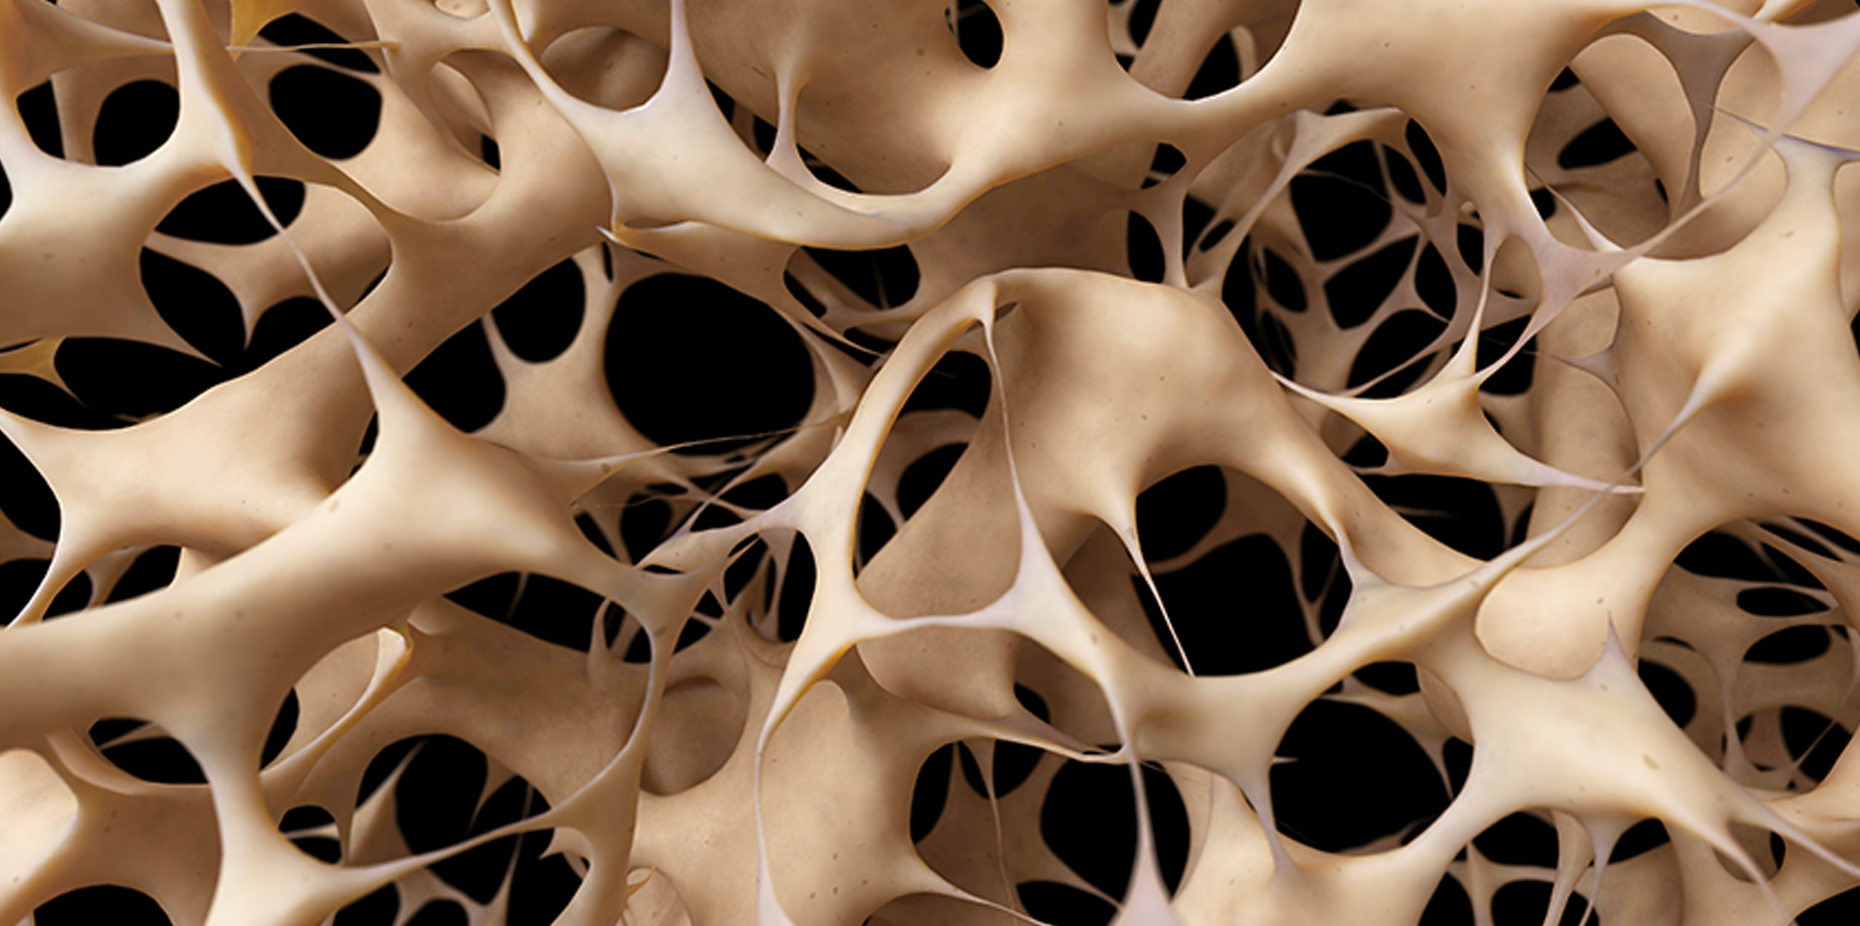 Osteoporosis: Symptoms, Causes, Treatments, and More